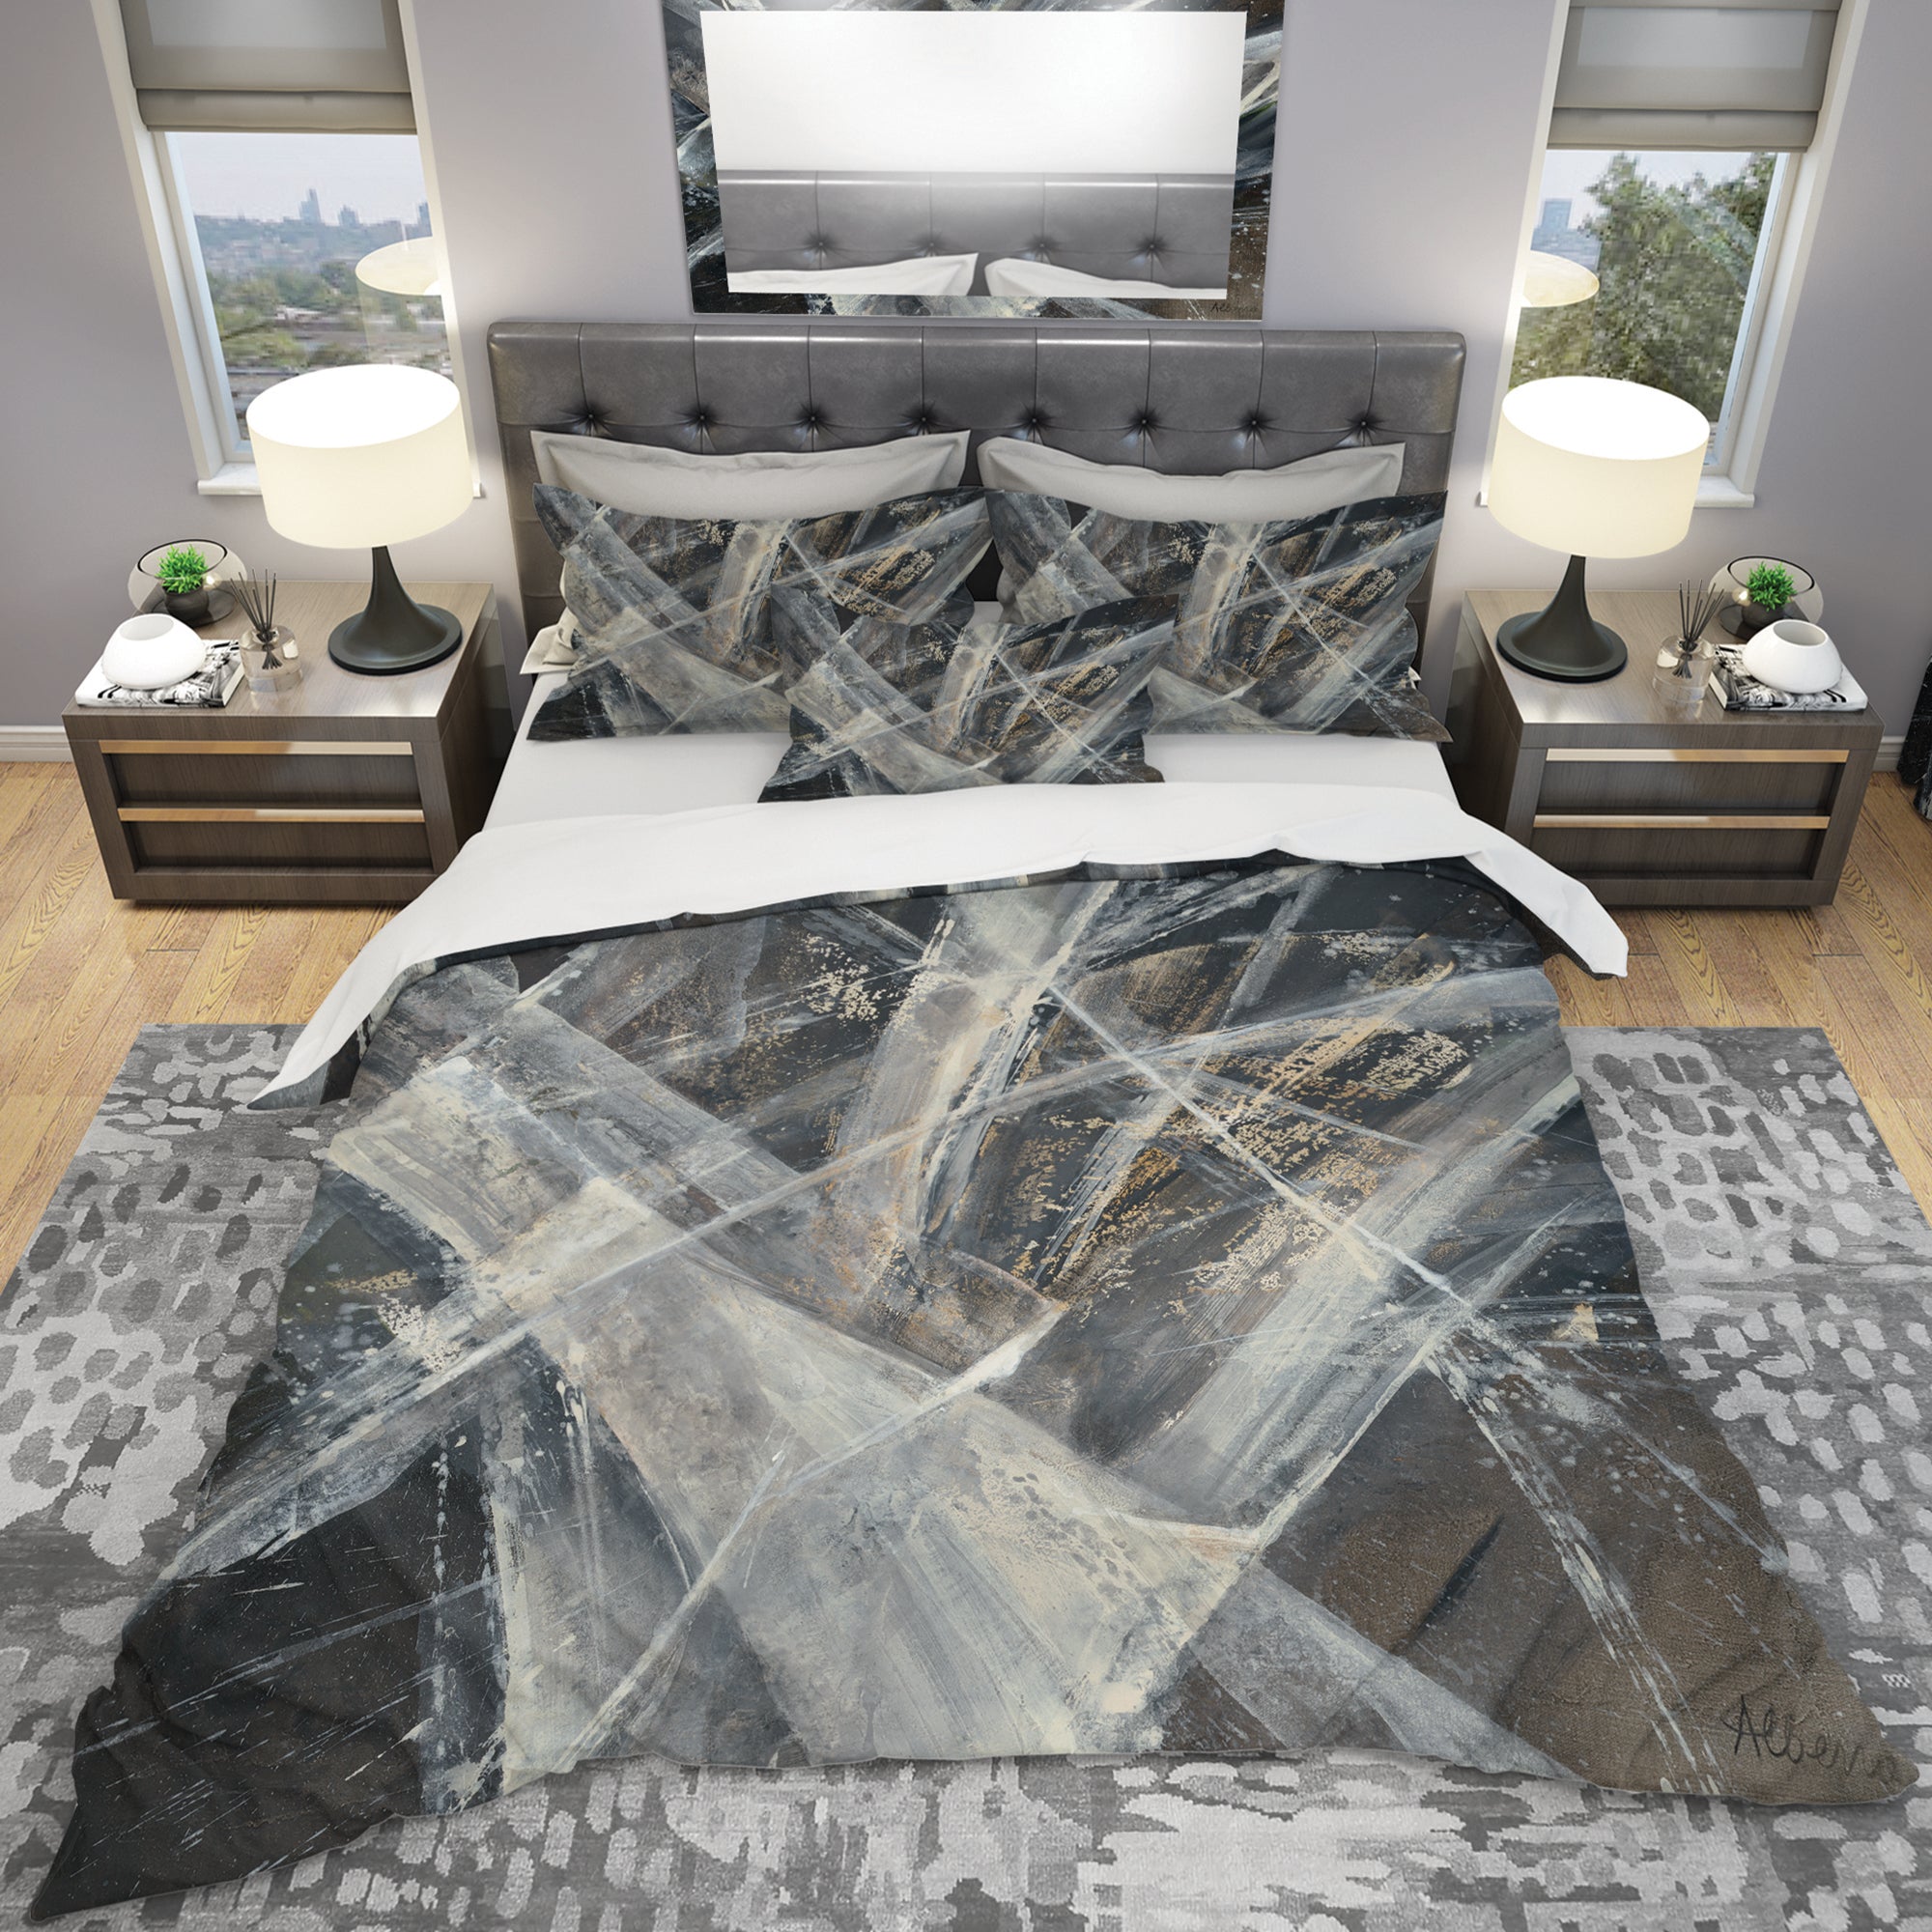 Abstract Glacial Black and White Painting - Geometric Duvet Cover Set